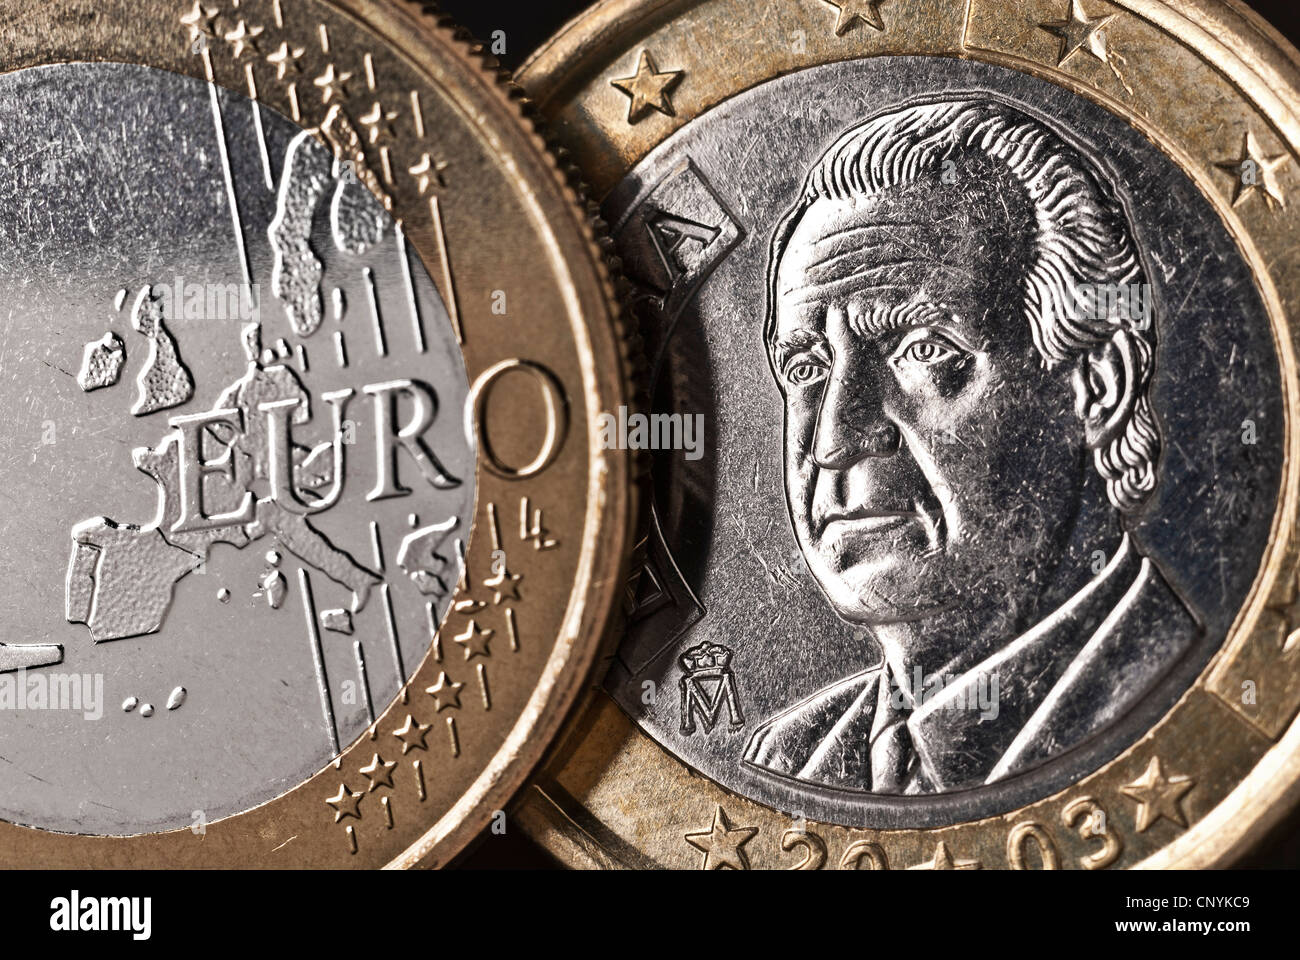 Front and back of a Spanish € coin in close up. Stock Photo